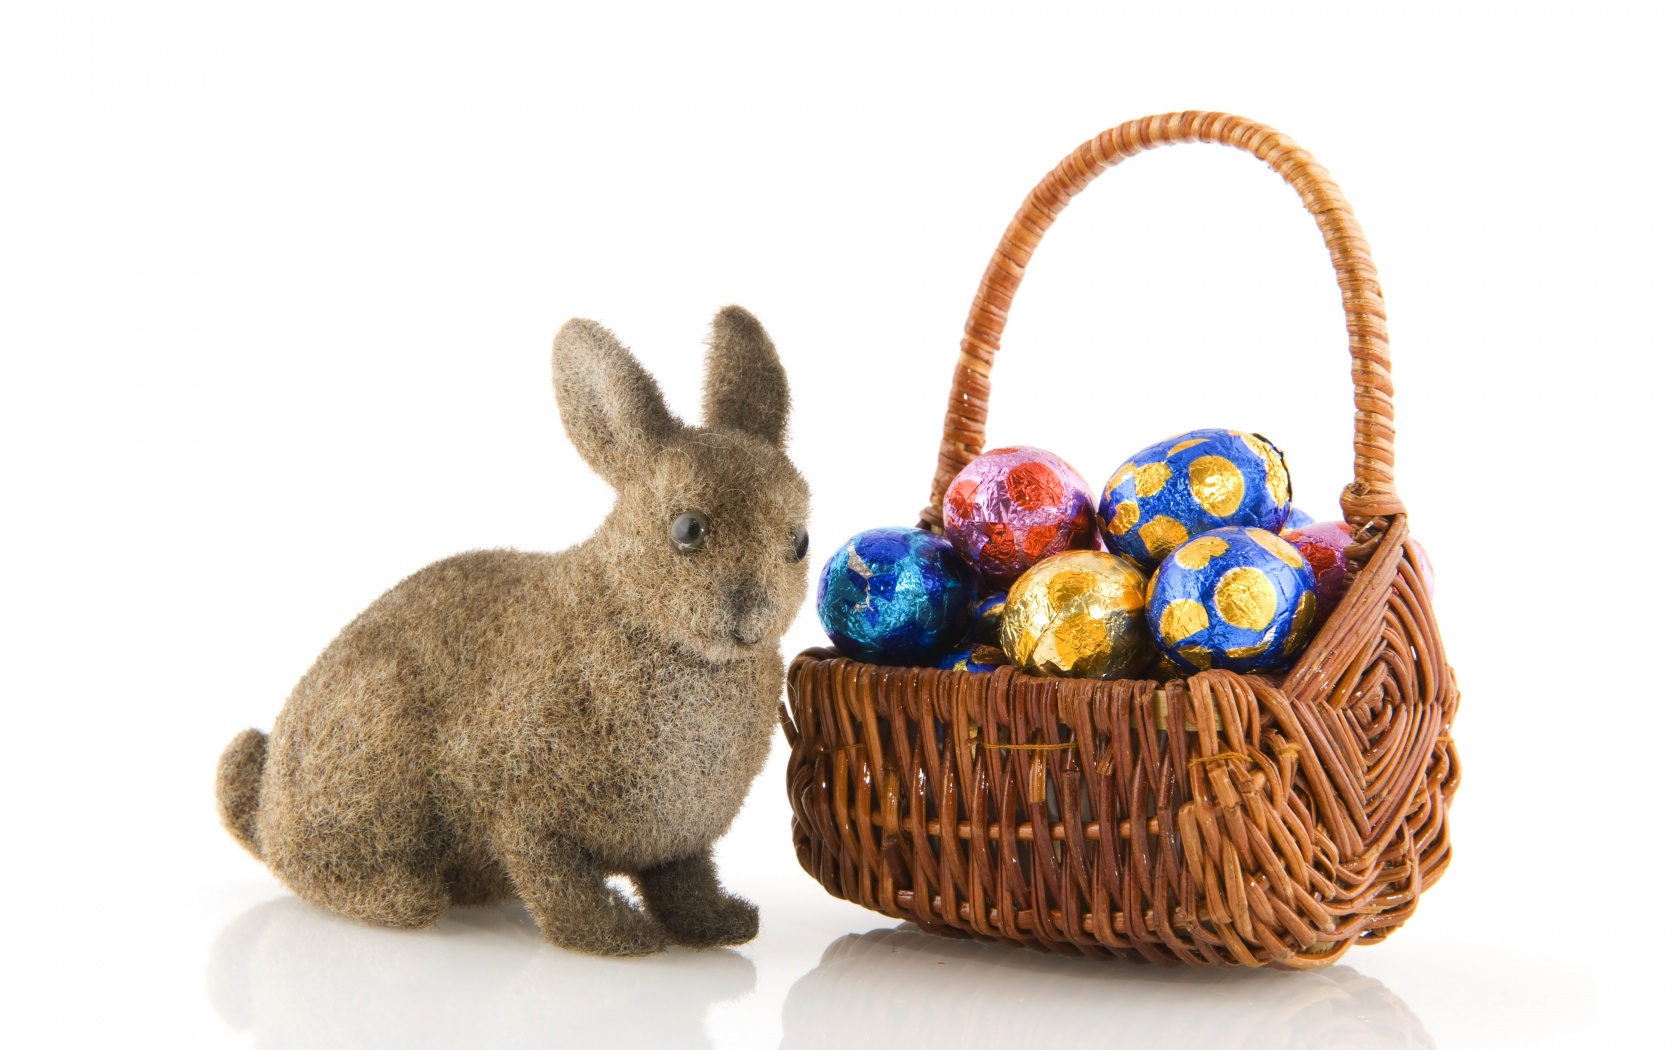 Basket Of Easter Eggs And Bunny